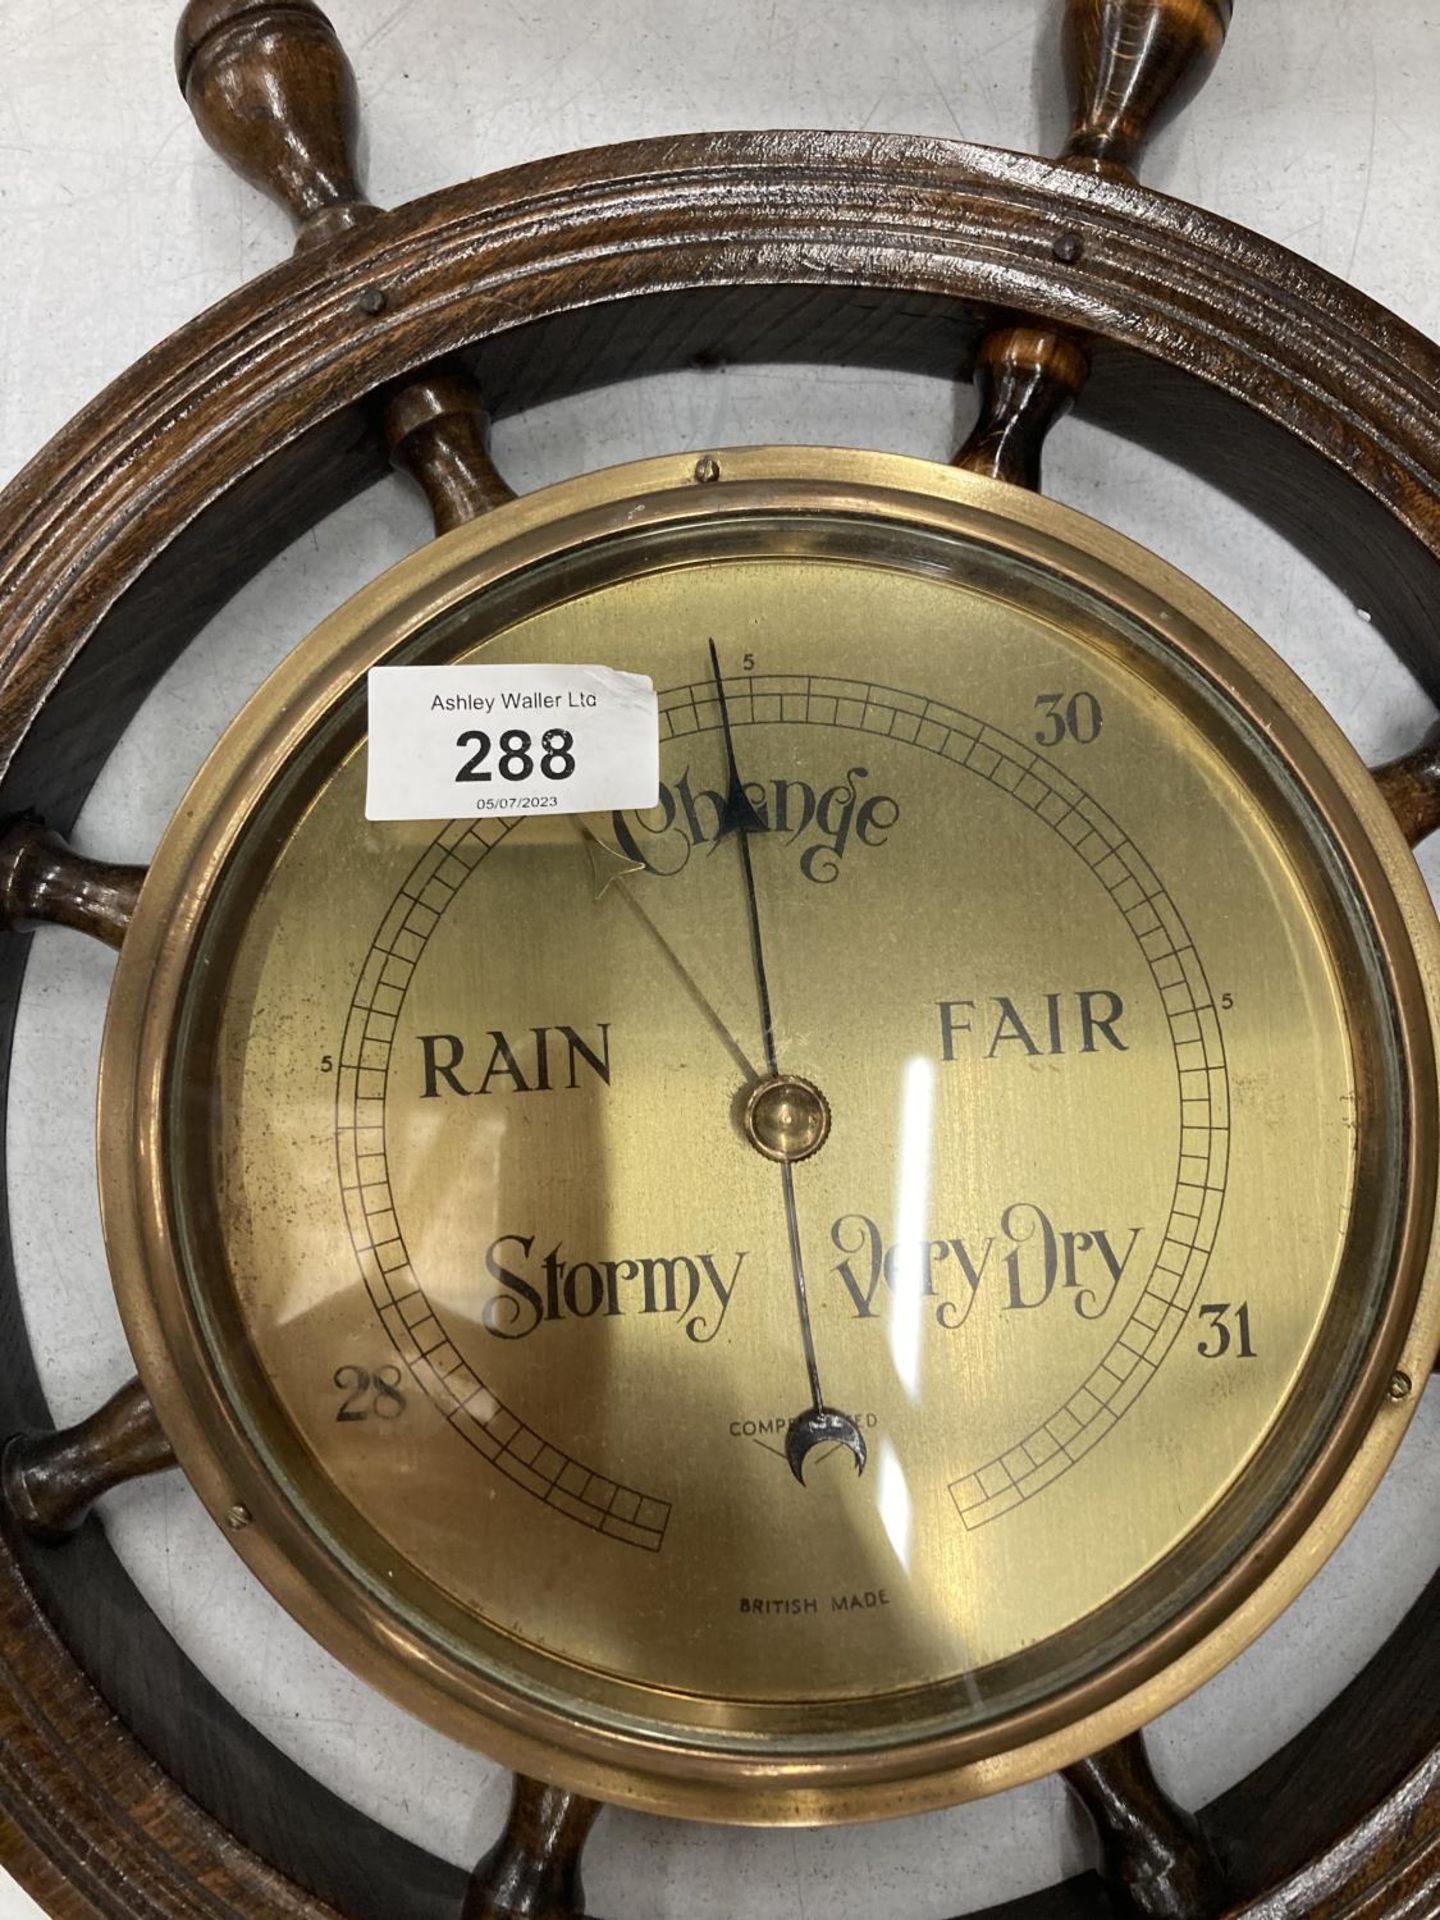 A BRASS FACED BAROMETER IN A WOODEN SHIPS WHEEL - Image 2 of 3